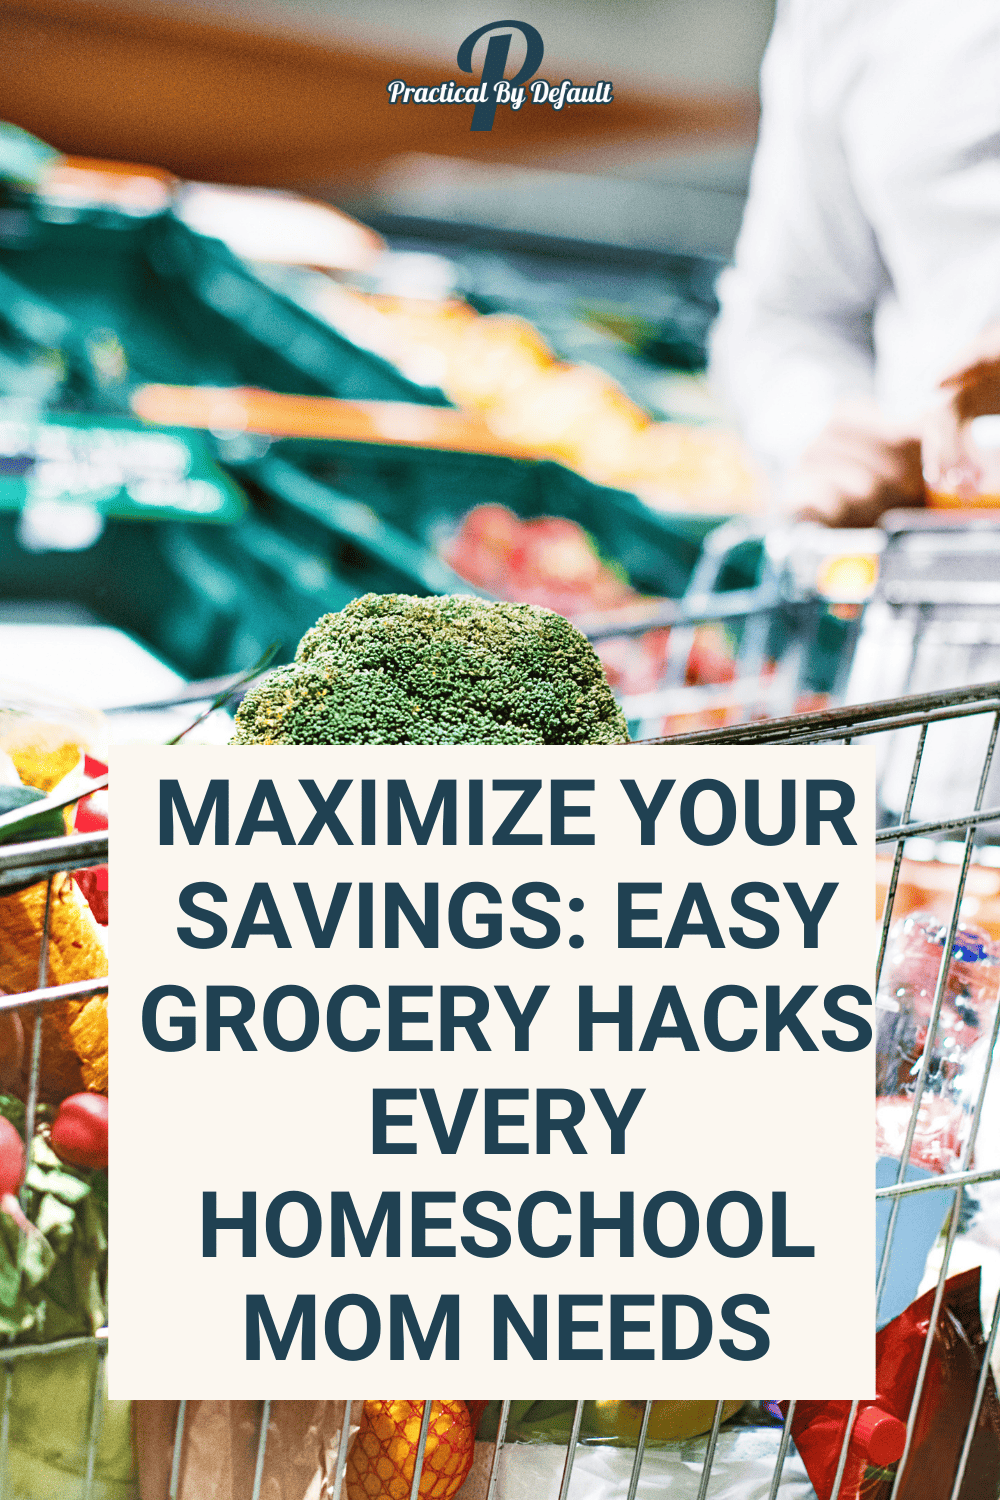 A Pinterest graphic with a clear view of a shopping cart brimming with groceries, overlaid with bold white text that reads 'Maximize Your Savings: Easy Grocery Hacks Every Homeschool Mom Needs' against a bright supermarket aisle backdrop